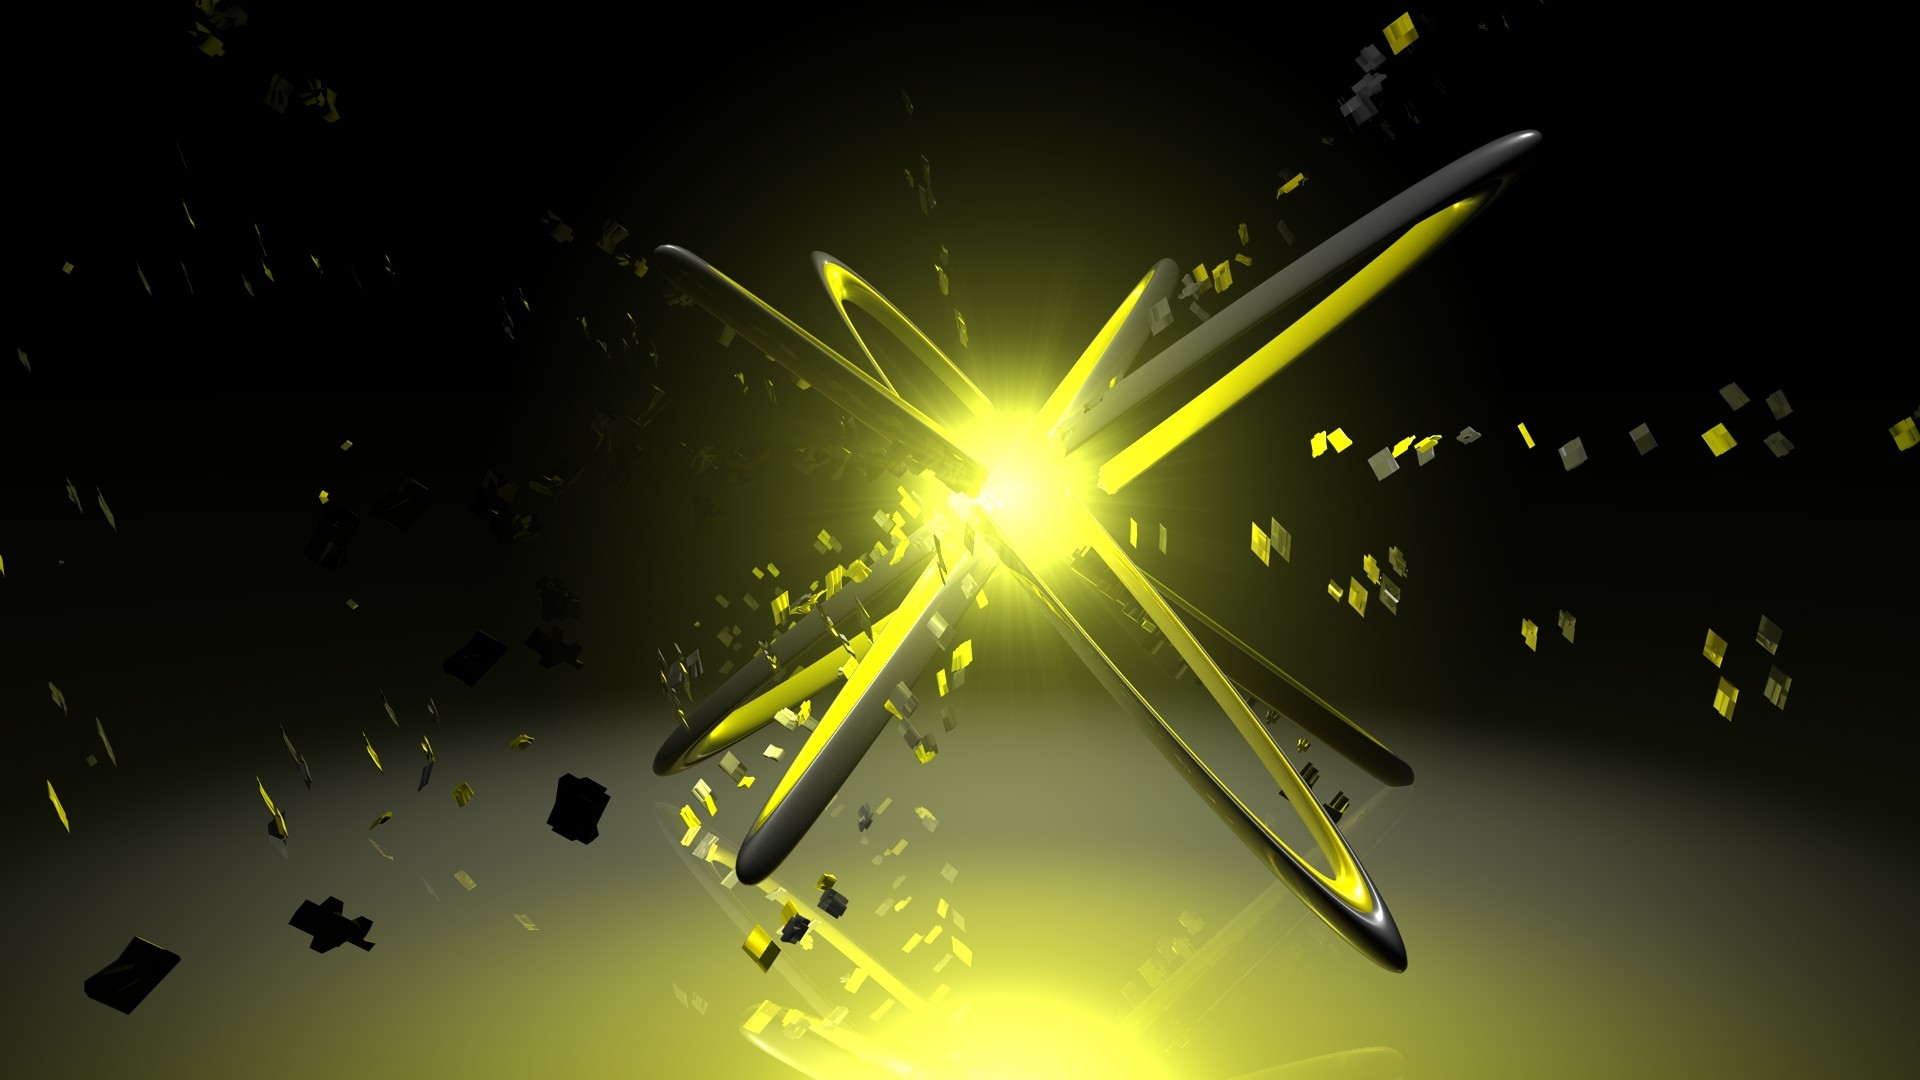  Black  and Yellow  background   Download free stunning 